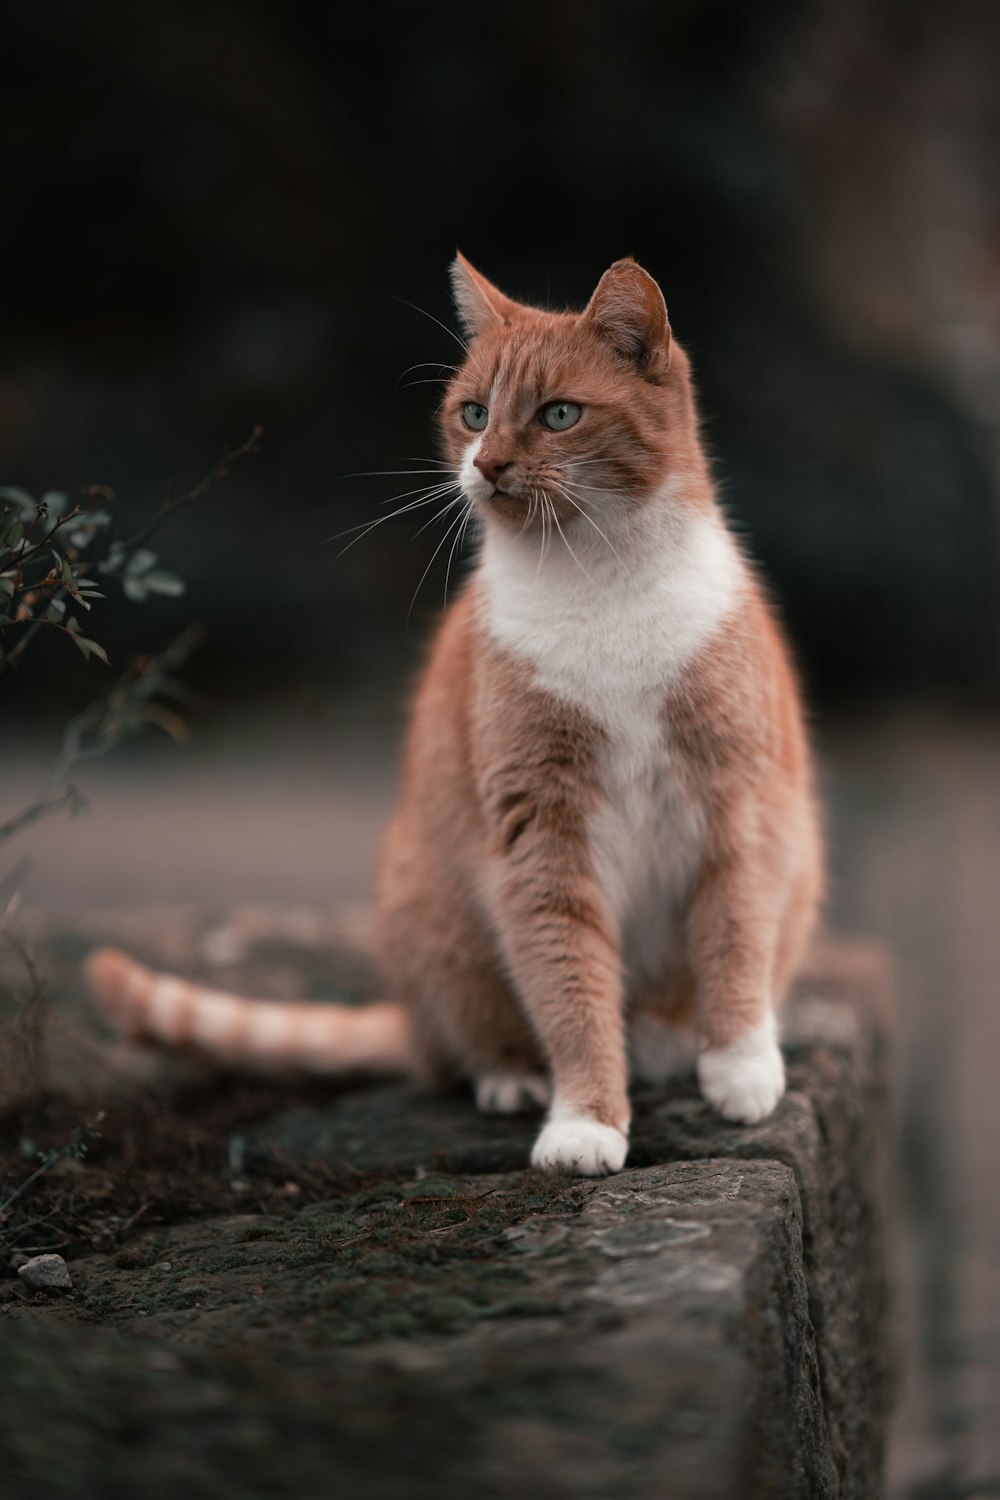 an orange and white cat sitting on top of a stone wall